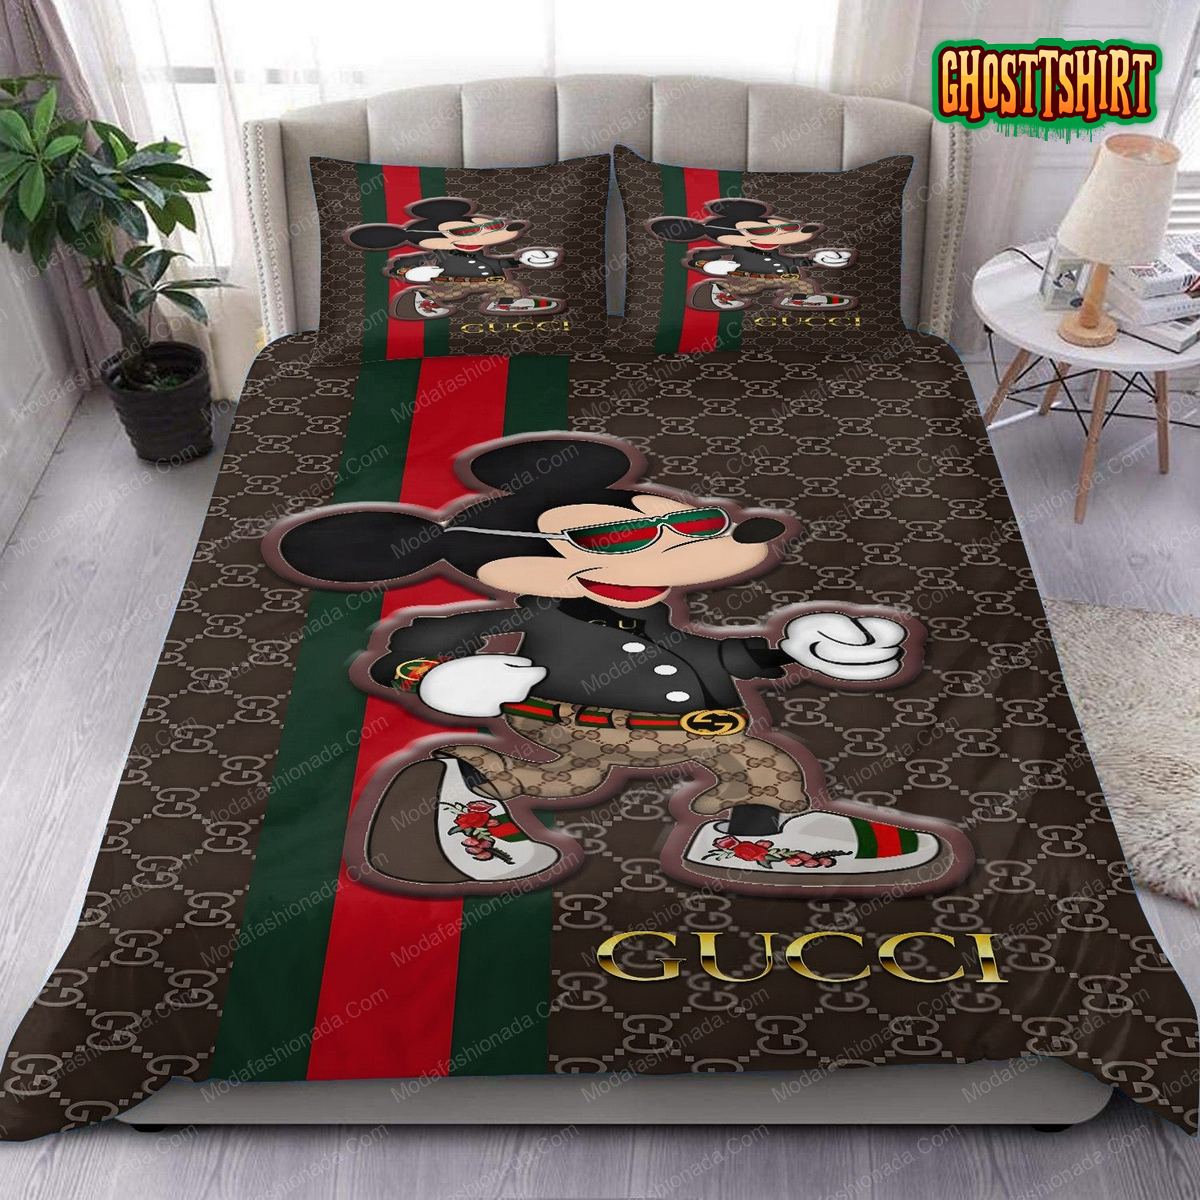 gucci mickey mouse luxury brand premium fashion hawaii shirt for